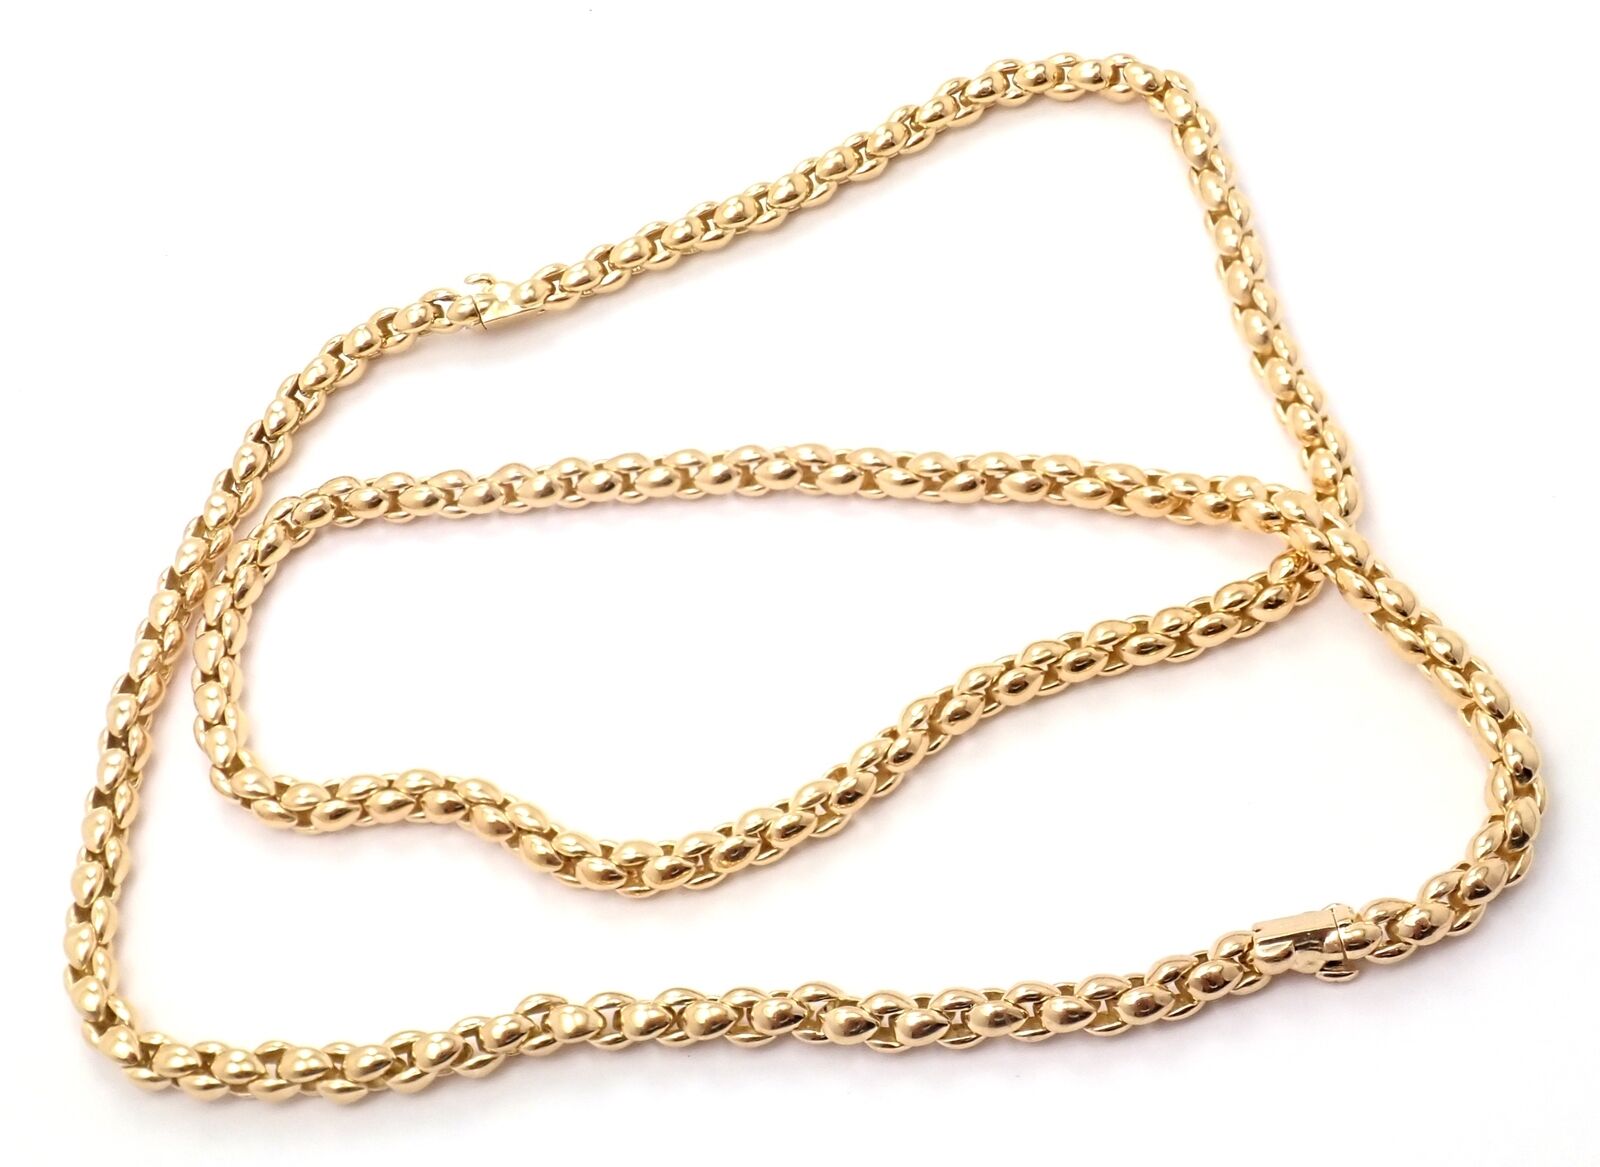 Antique 15 Carat Chain, Long Belcher Link Yellow Gold Heavy Chain Necklace.  Circa 1890s, 75.5 cm / 29.75 inches. - Addy's Vintage